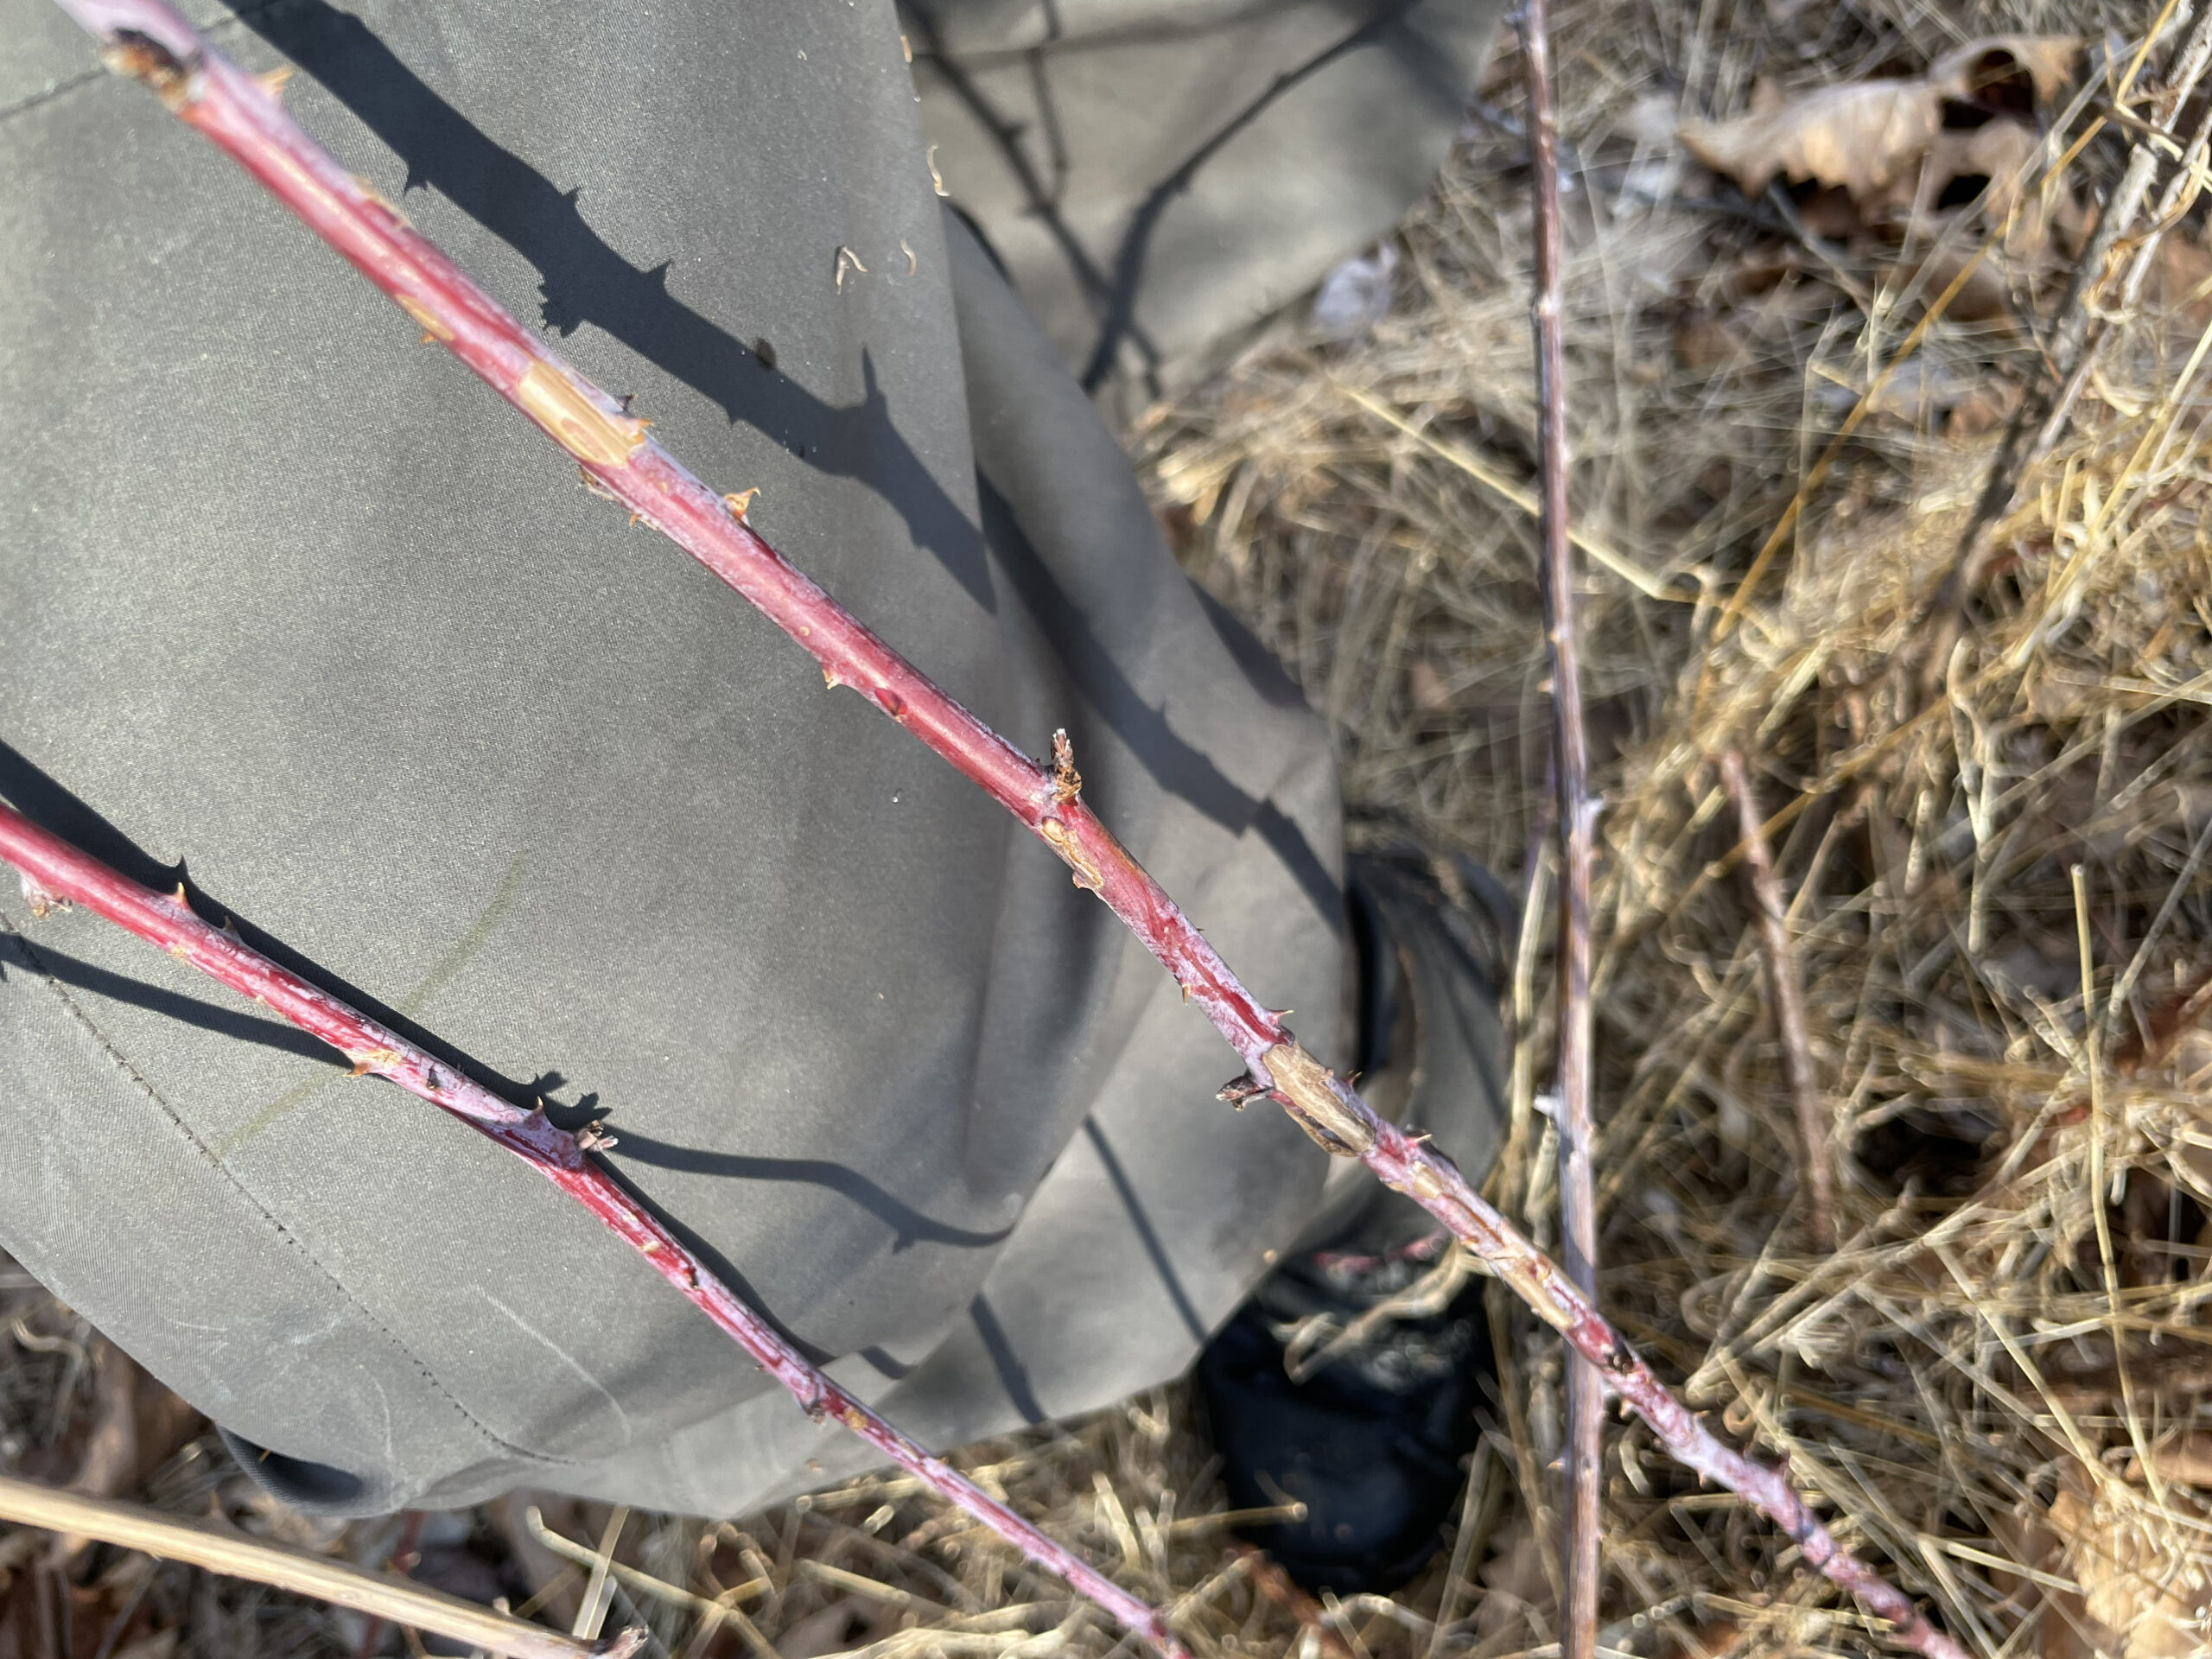 The author tested the Simms g3 waders in thorny brush.